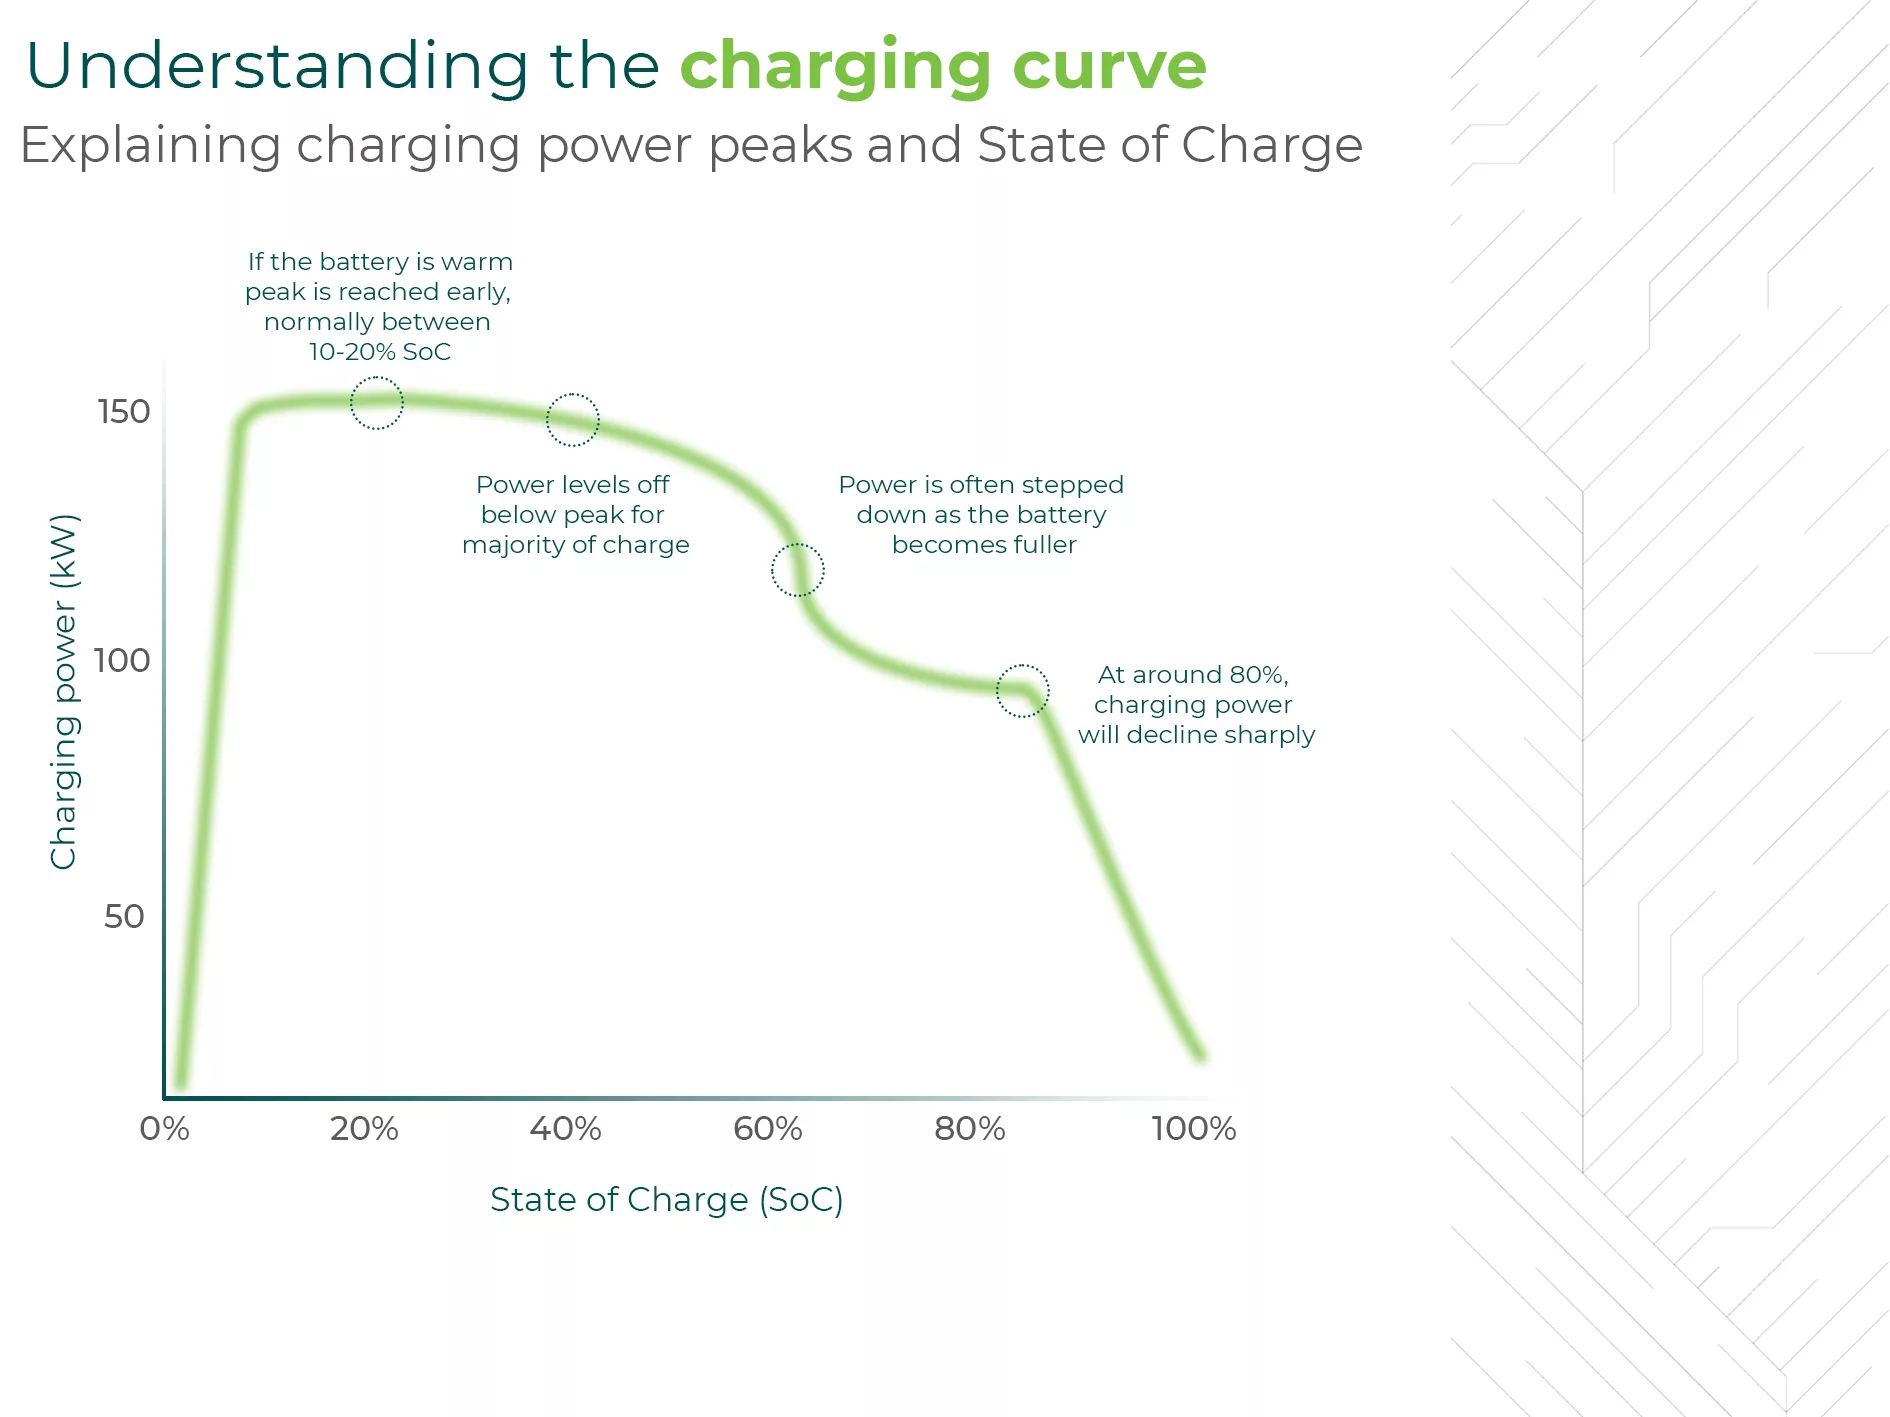 Electric Vehicle Charging Explained: Level 1, 2, and DC Fast Charging